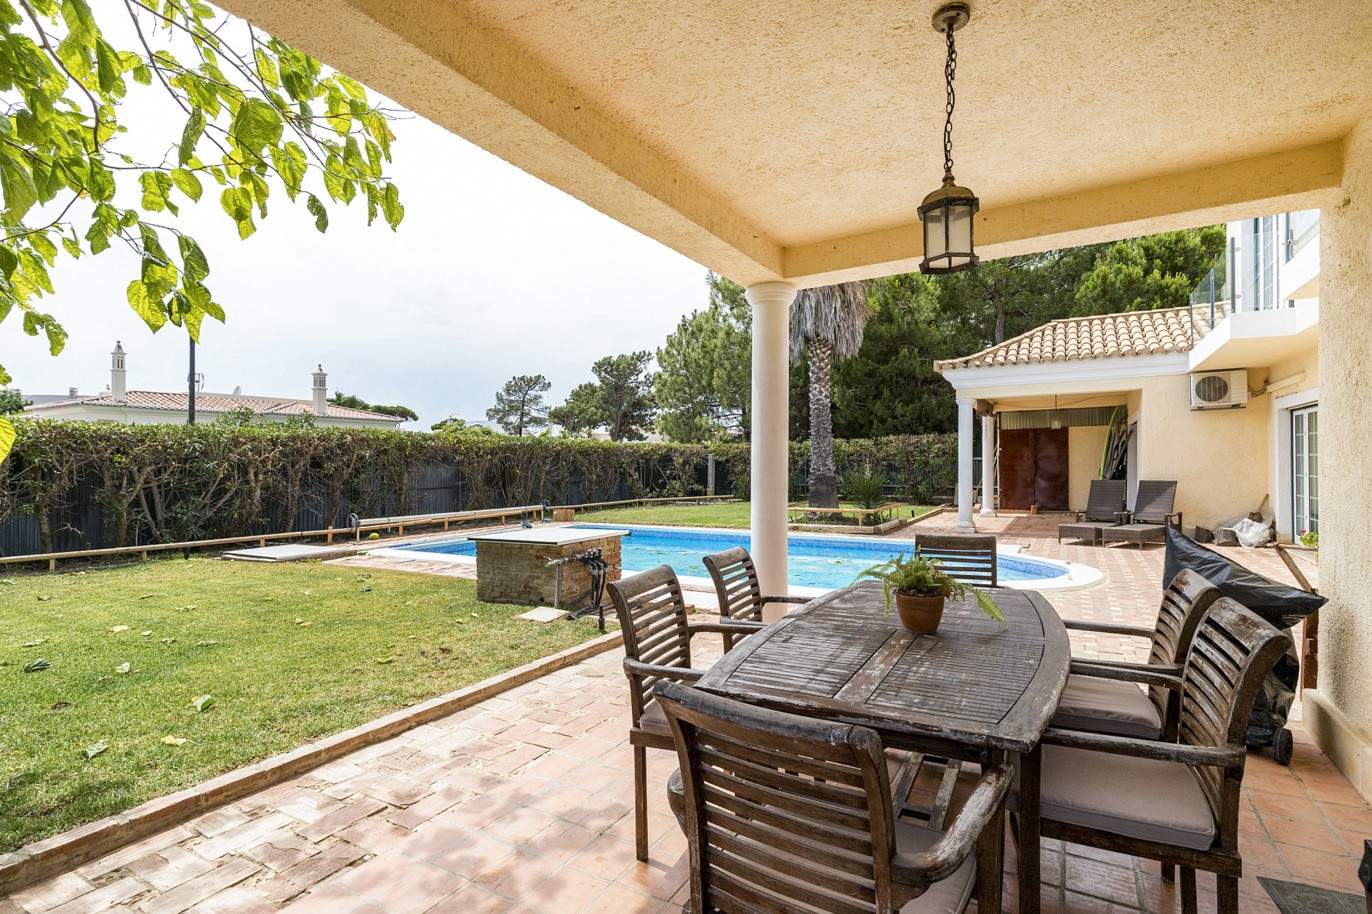 4 Bedroom Villa, with swimming pool, for sale, in Quarteira, Algarve_203451